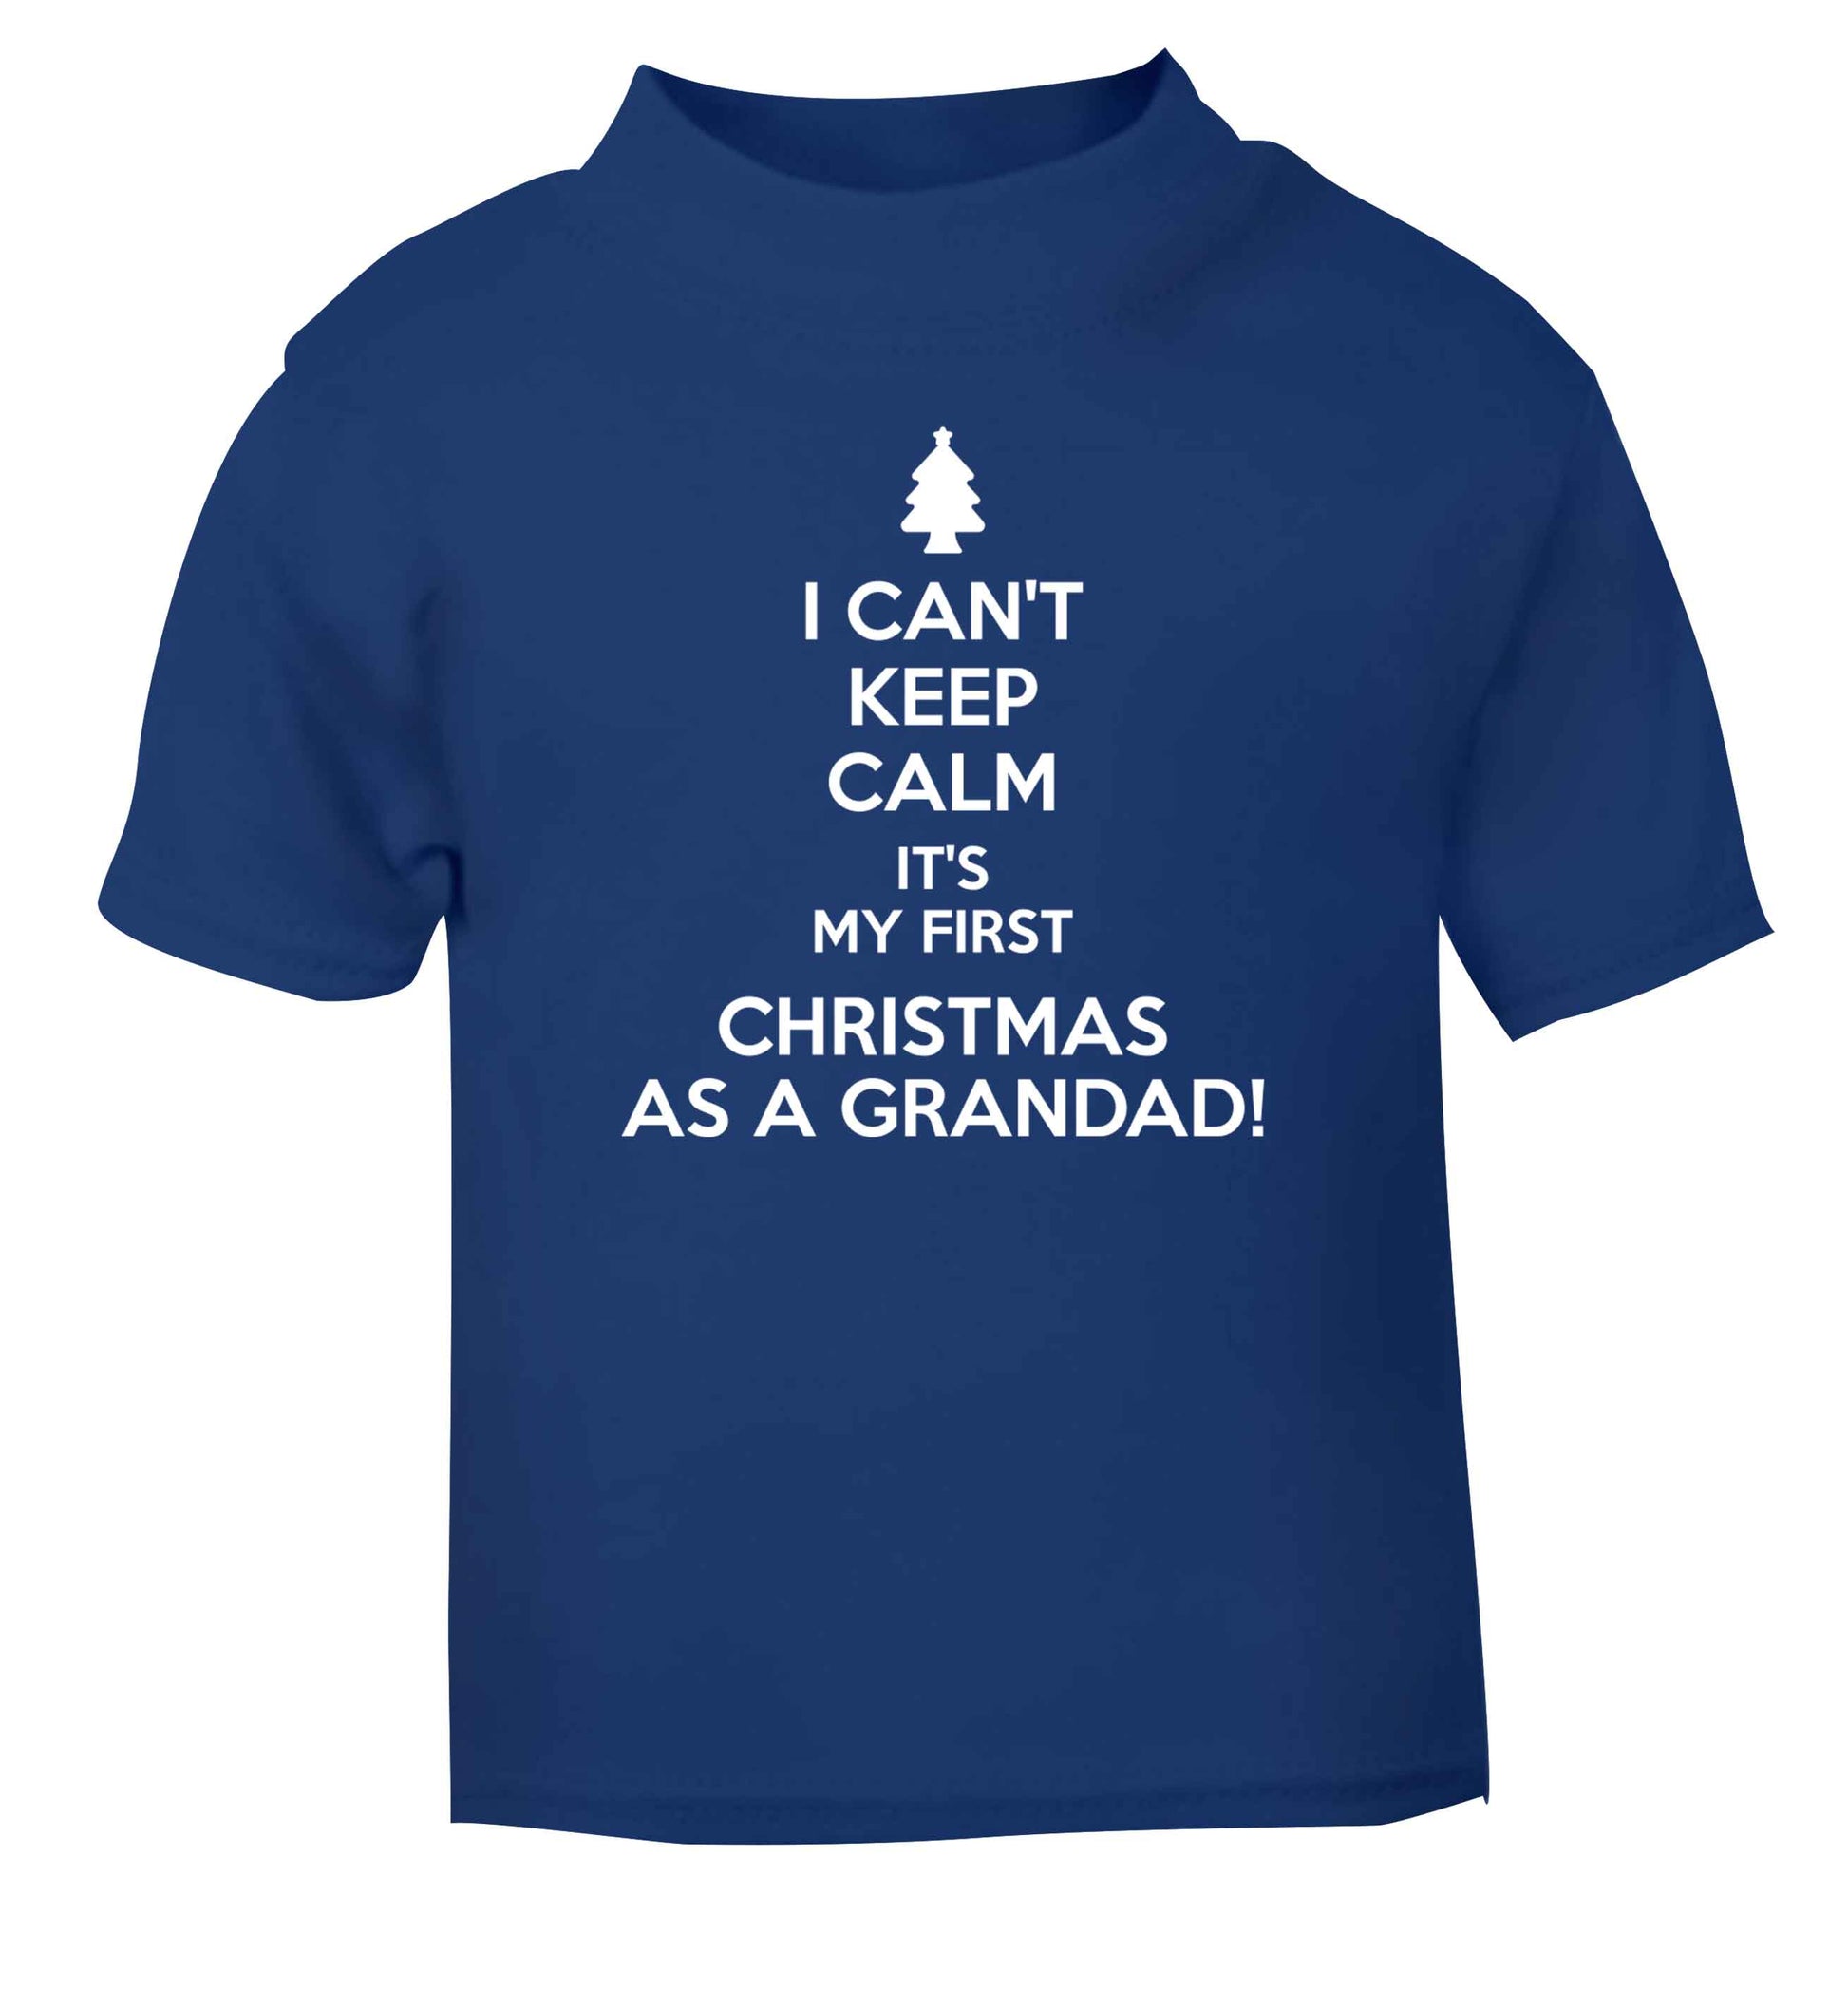 I can't keep calm it's my first Christmas as a grandad! blue Baby Toddler Tshirt 2 Years